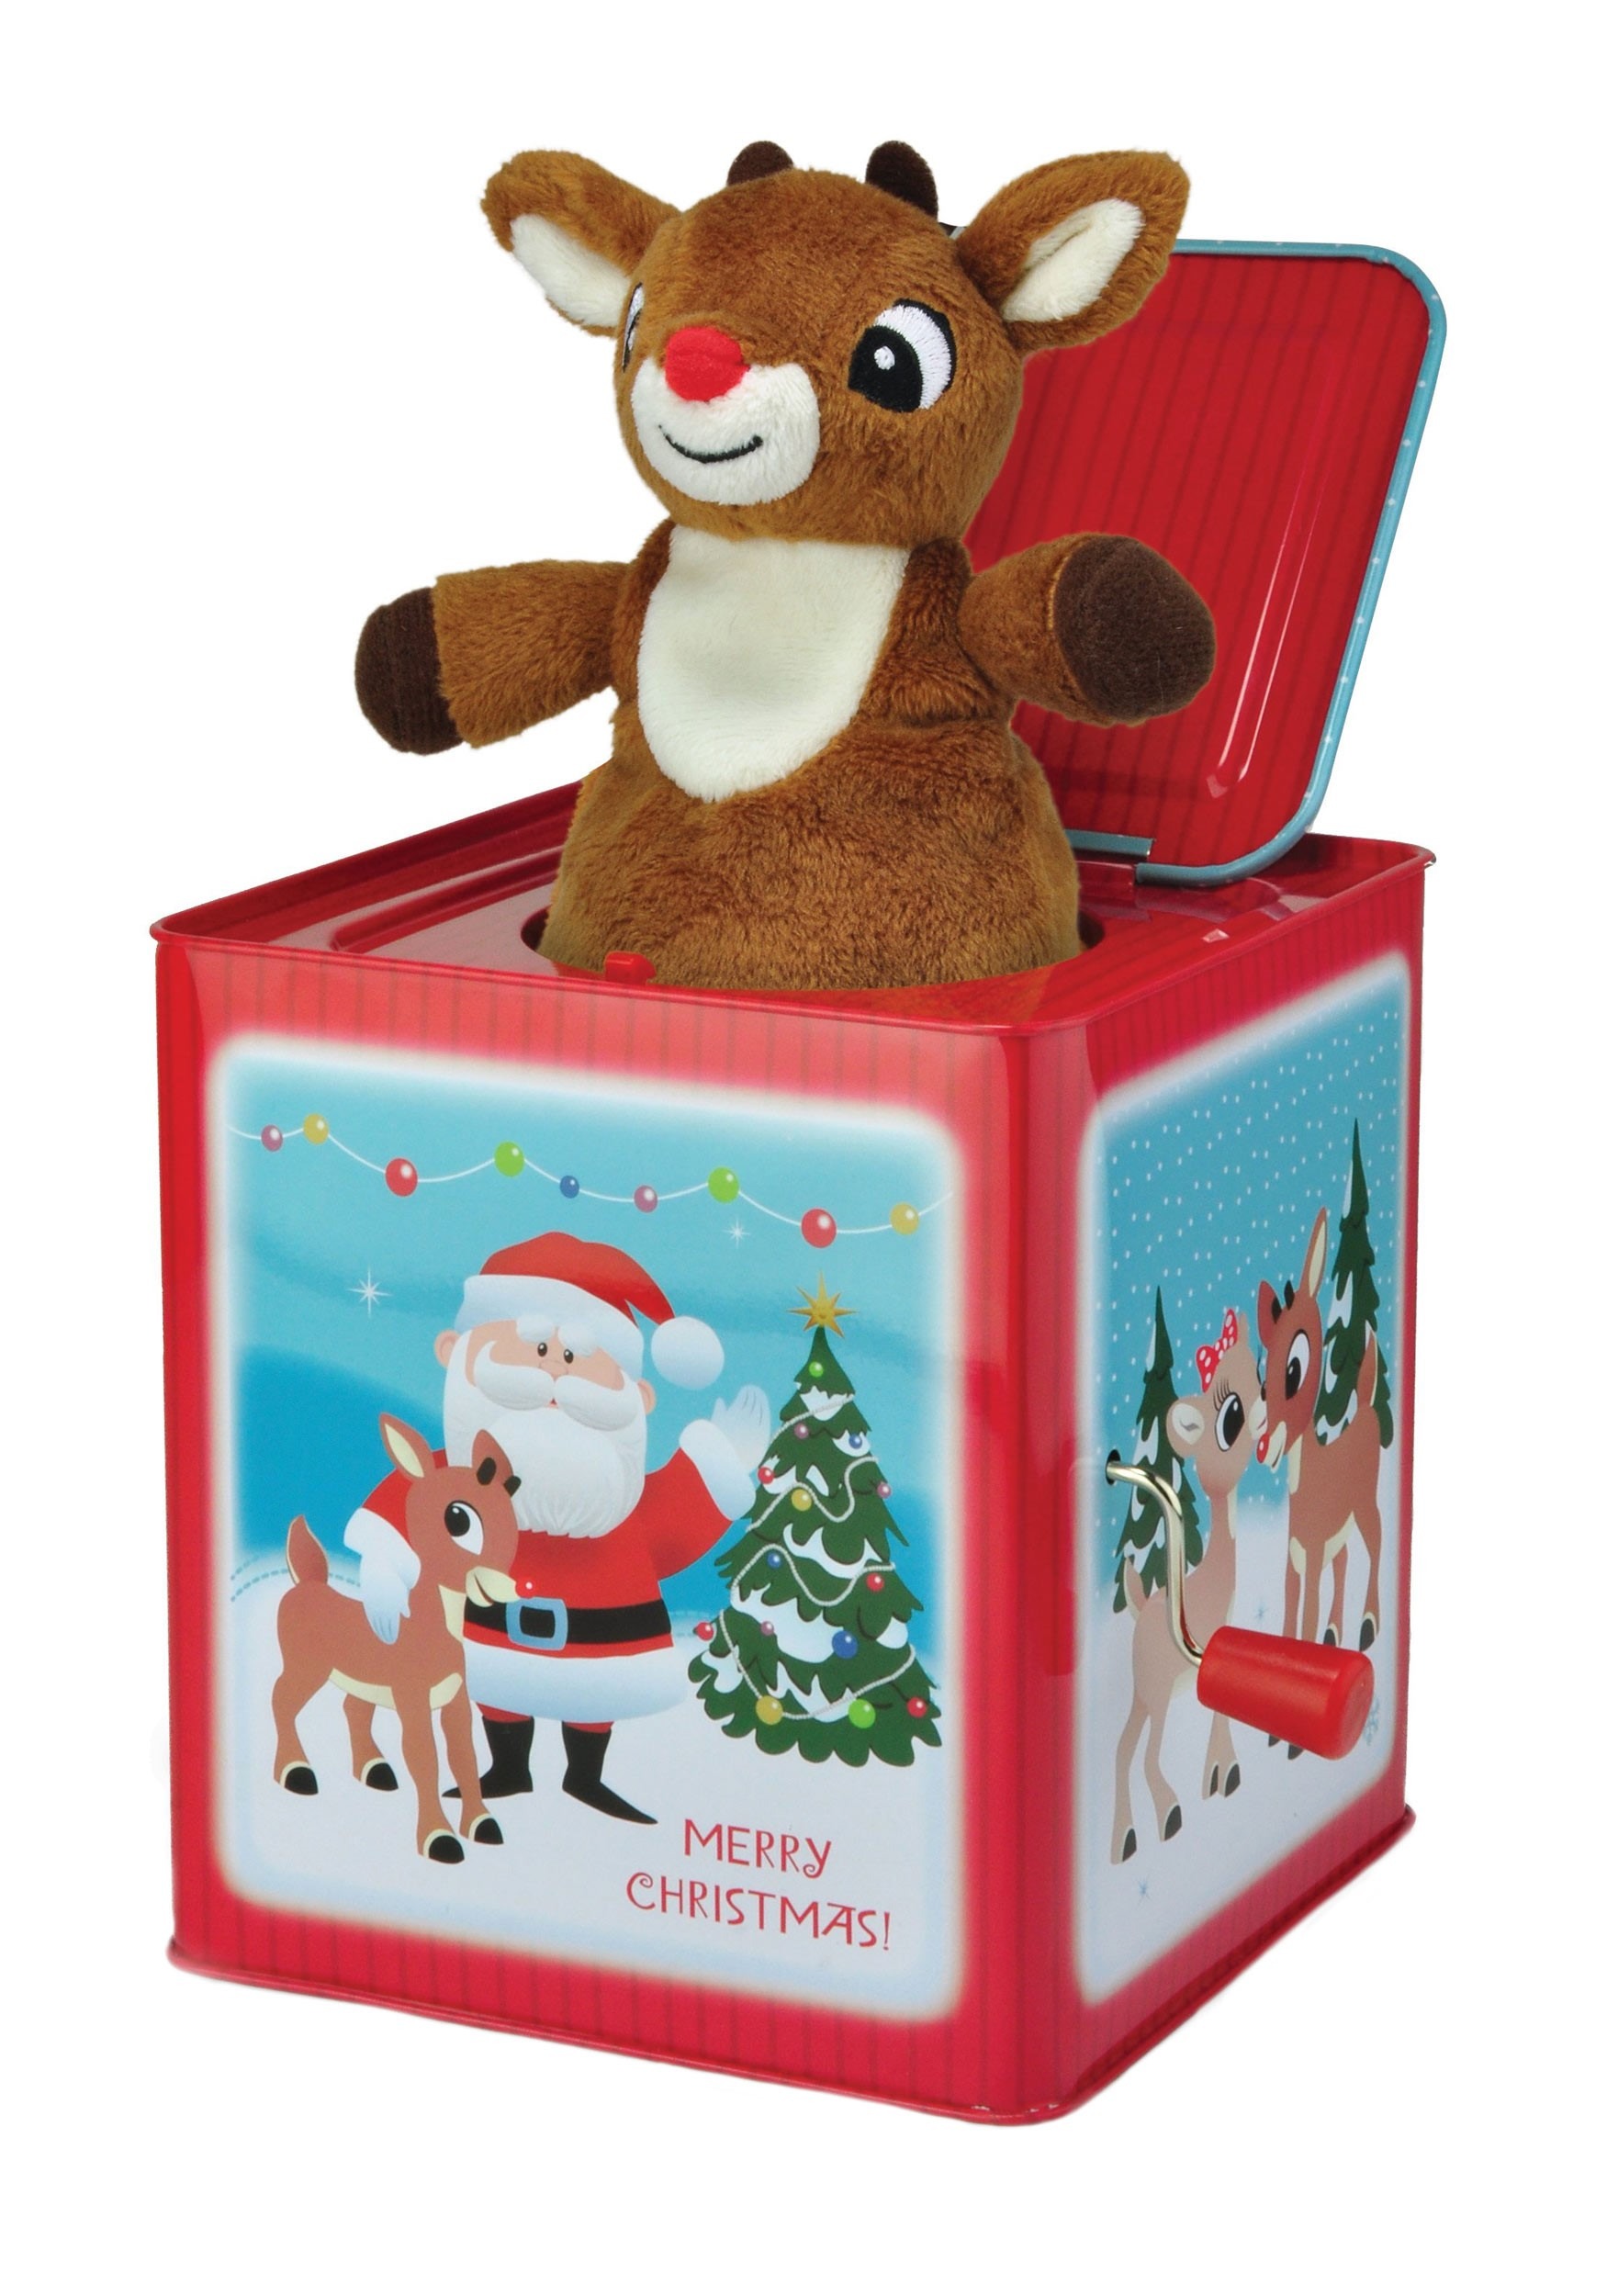 Rudolph the Red Nosed Reindeer Christmas Jack-in-the-Box